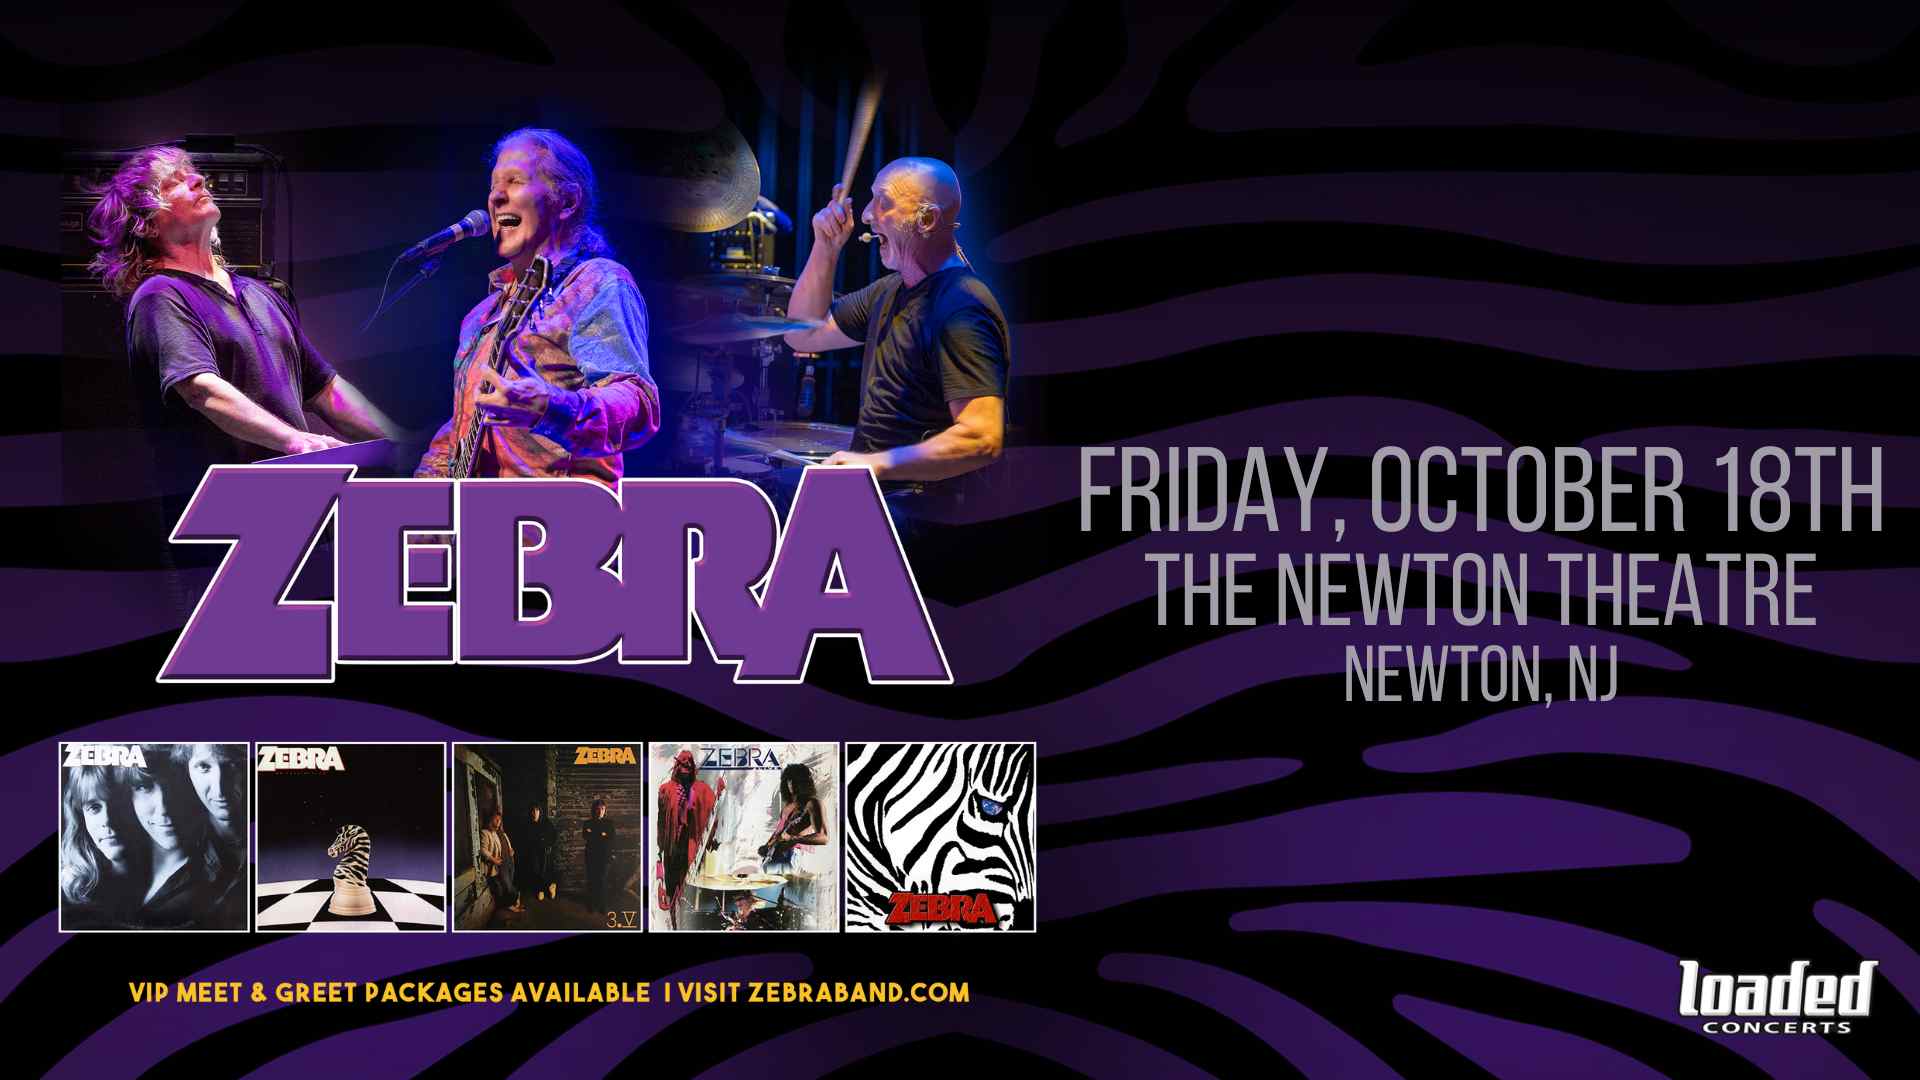 Zebra comes to The Newton Theatre on Friday, October 18th.